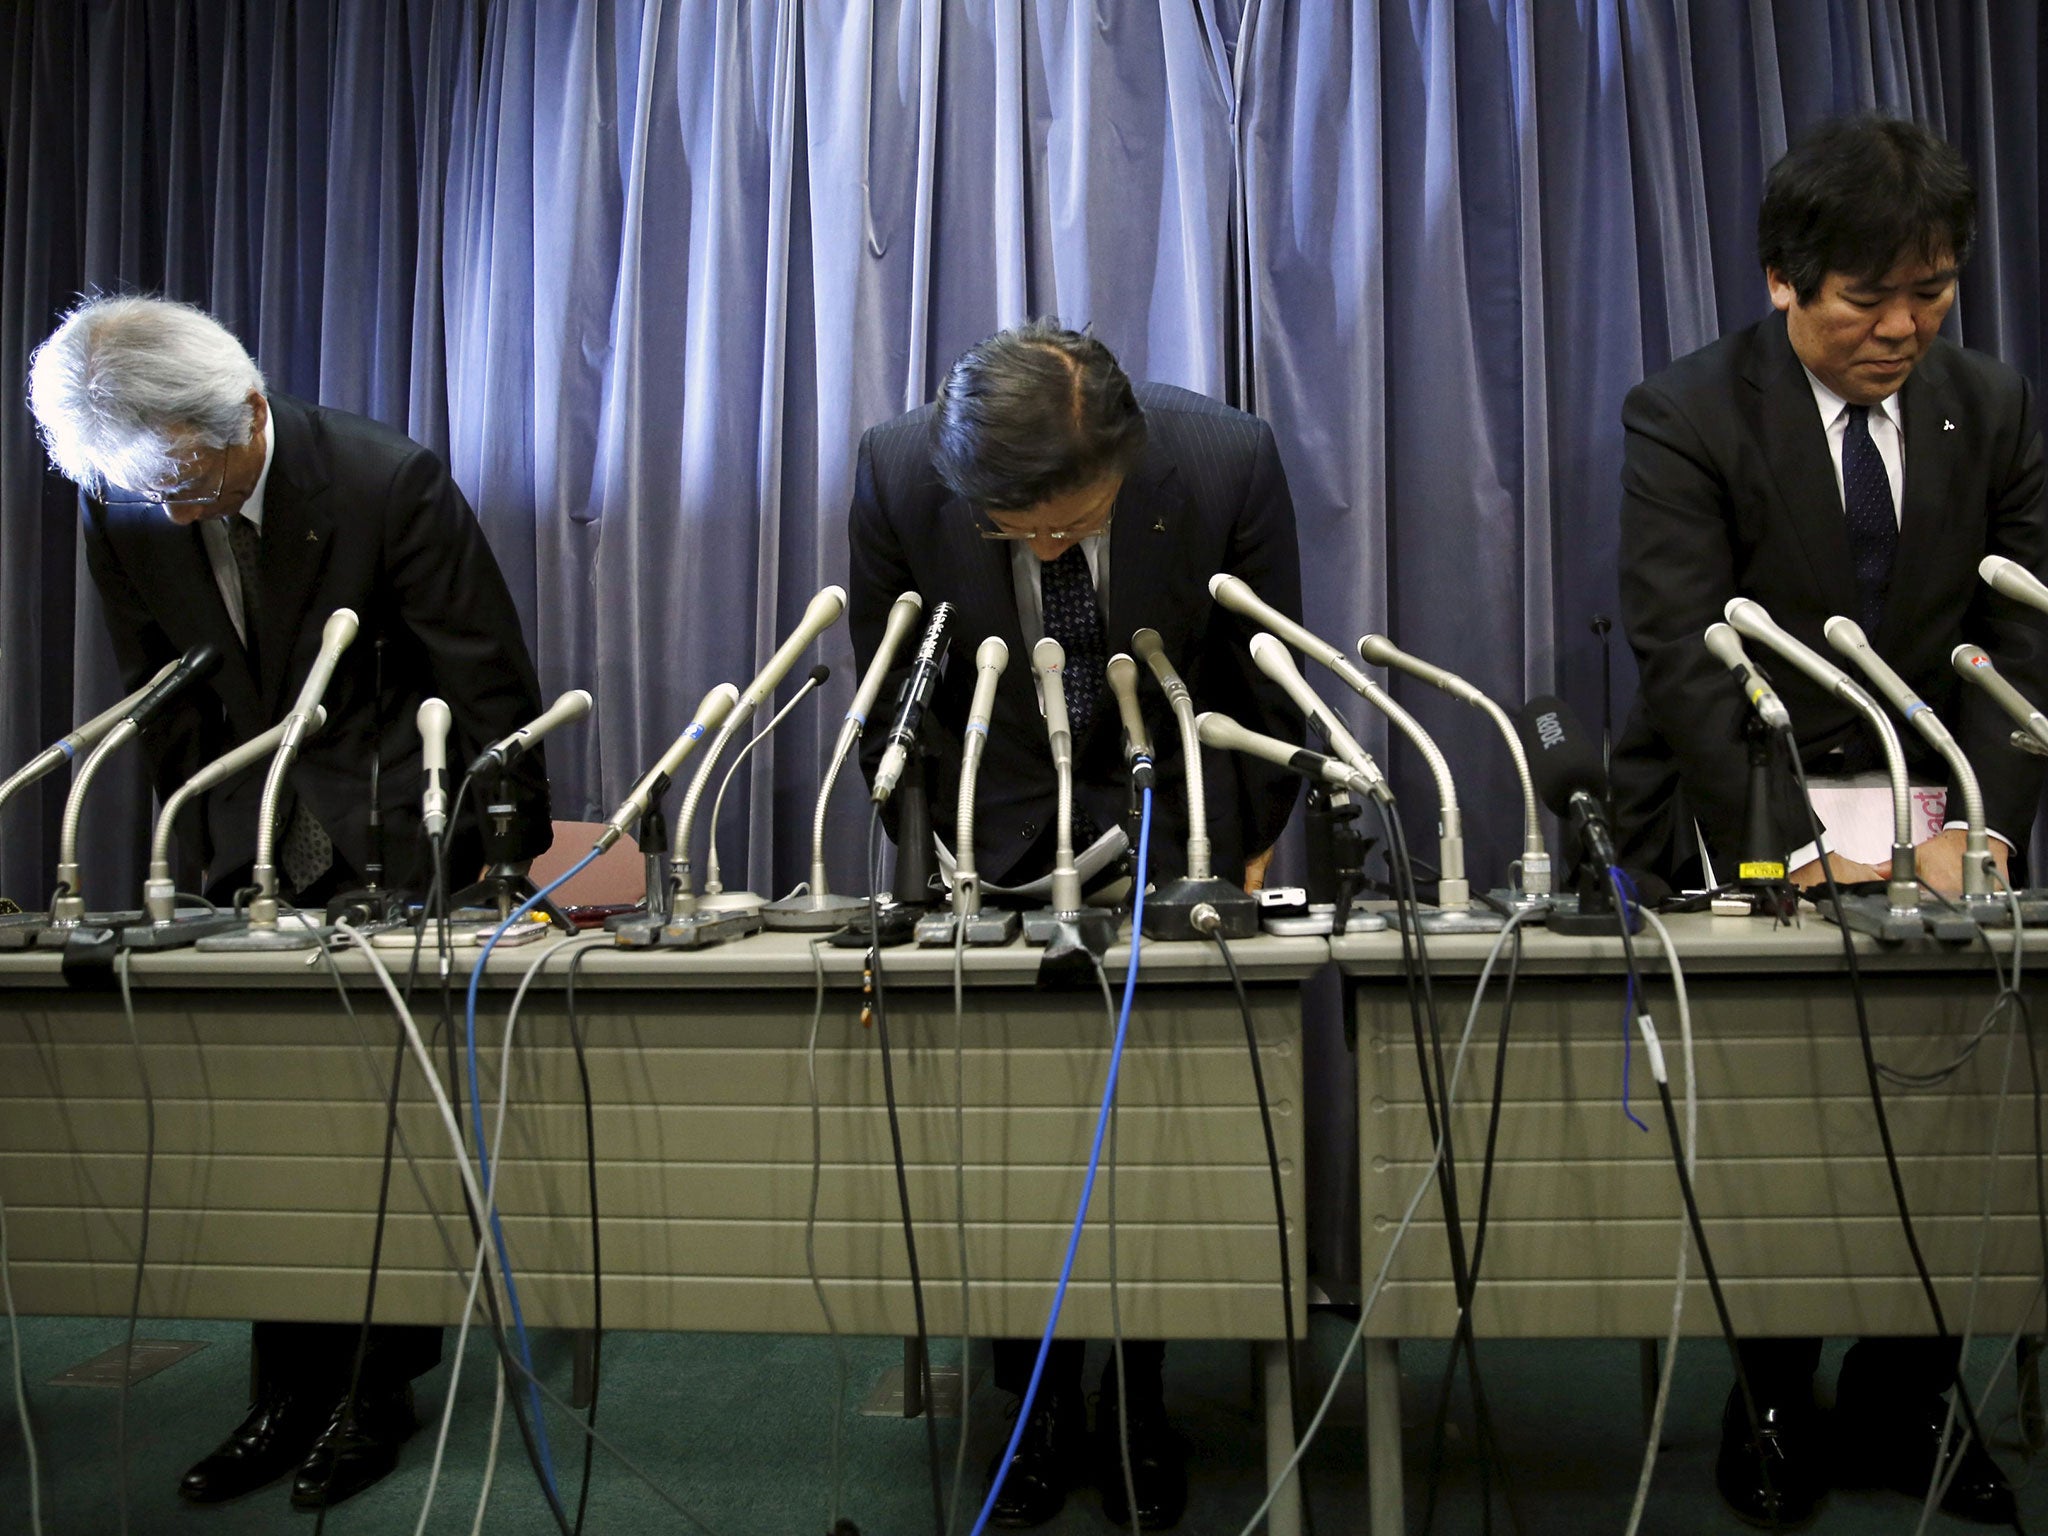 Mitsubishi Motors Corp's executives in a news conference used to brief about issues of misconduct in fuel economy tests in Tokyo, Japan